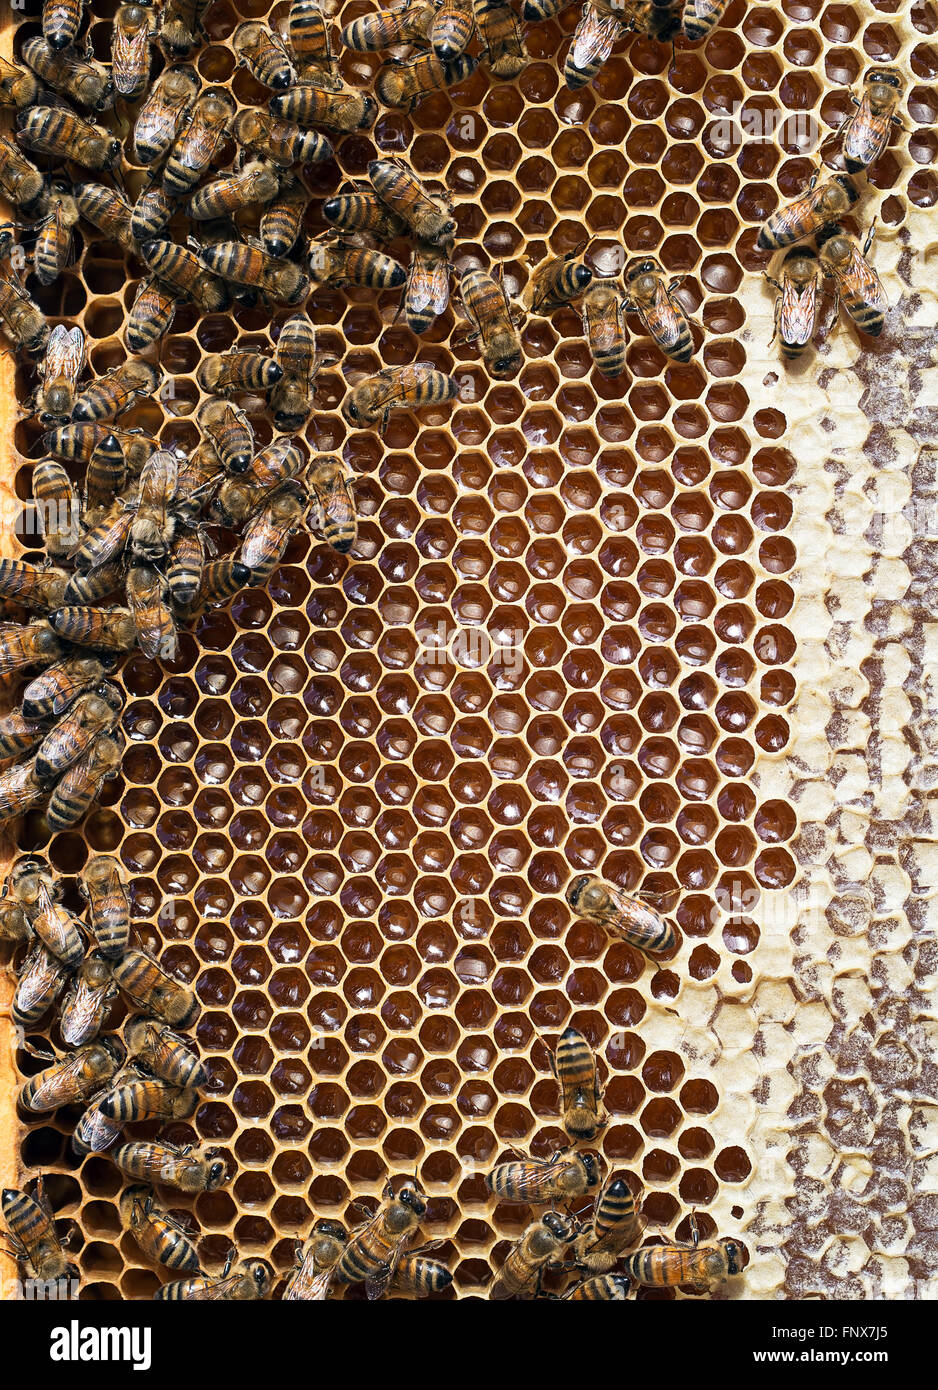 Closeup of honey bees in hive, with honeycomb. Stock Photo